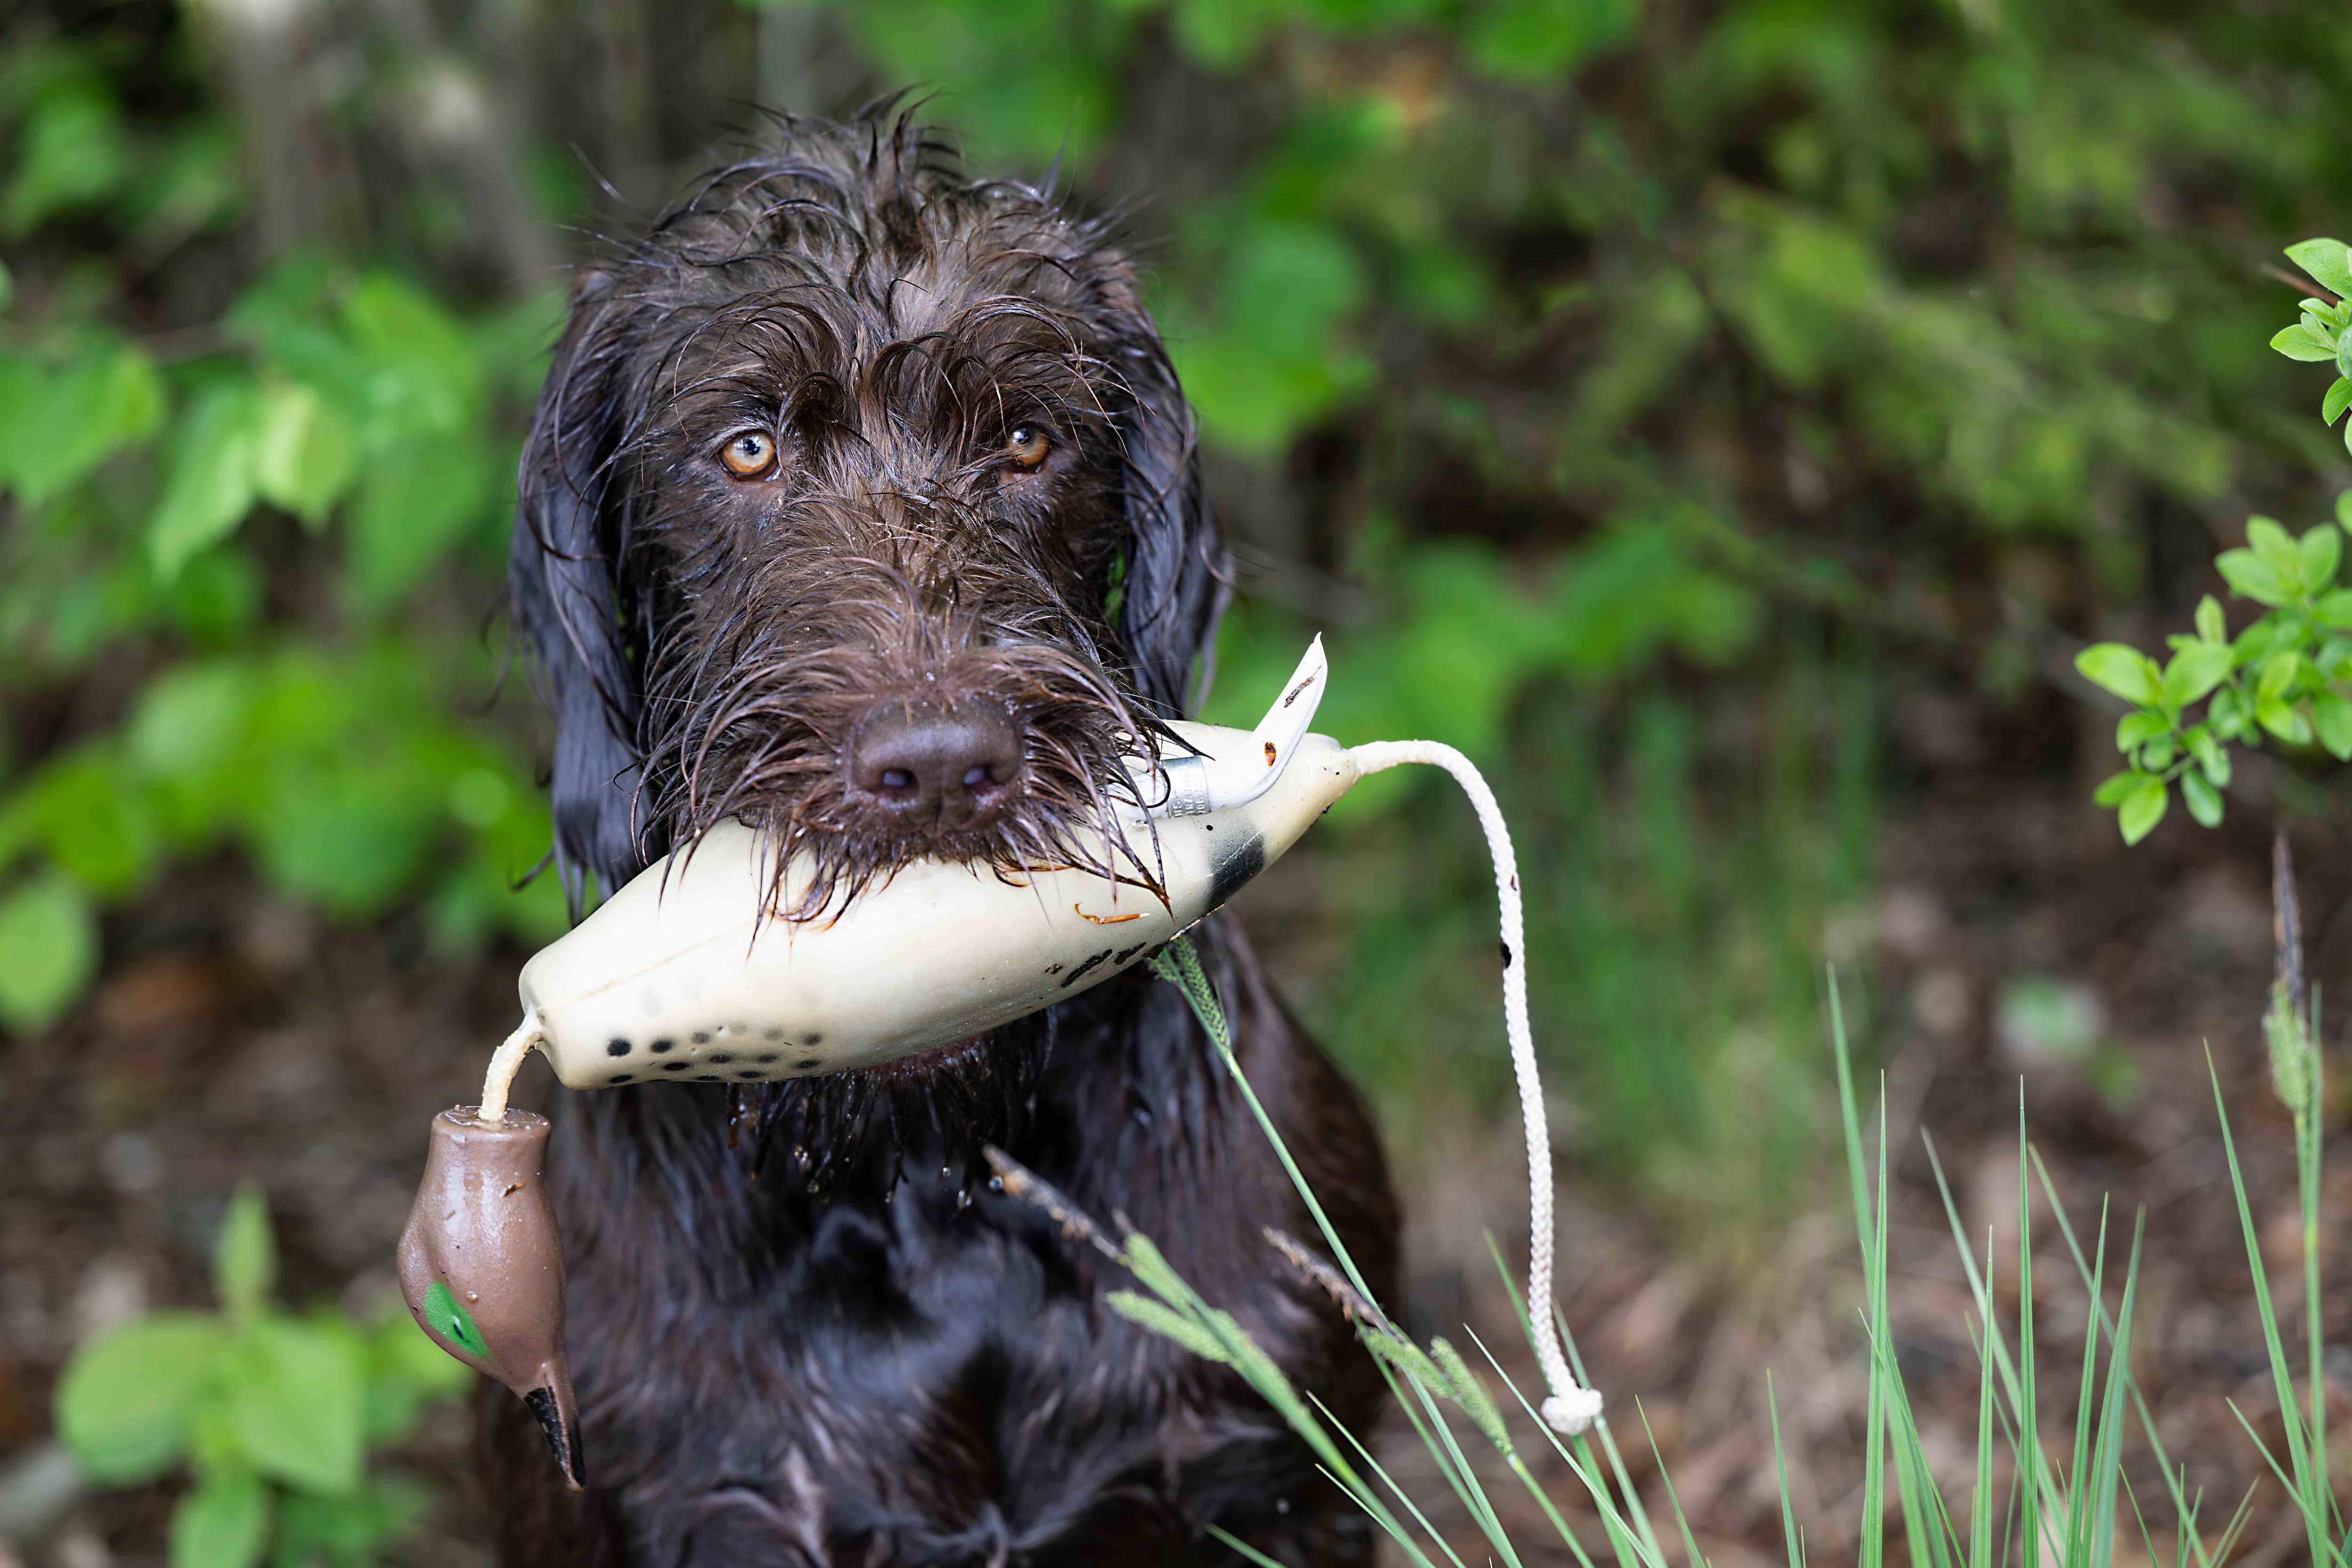 wet pudelpointer with a duck decoy in its mouth